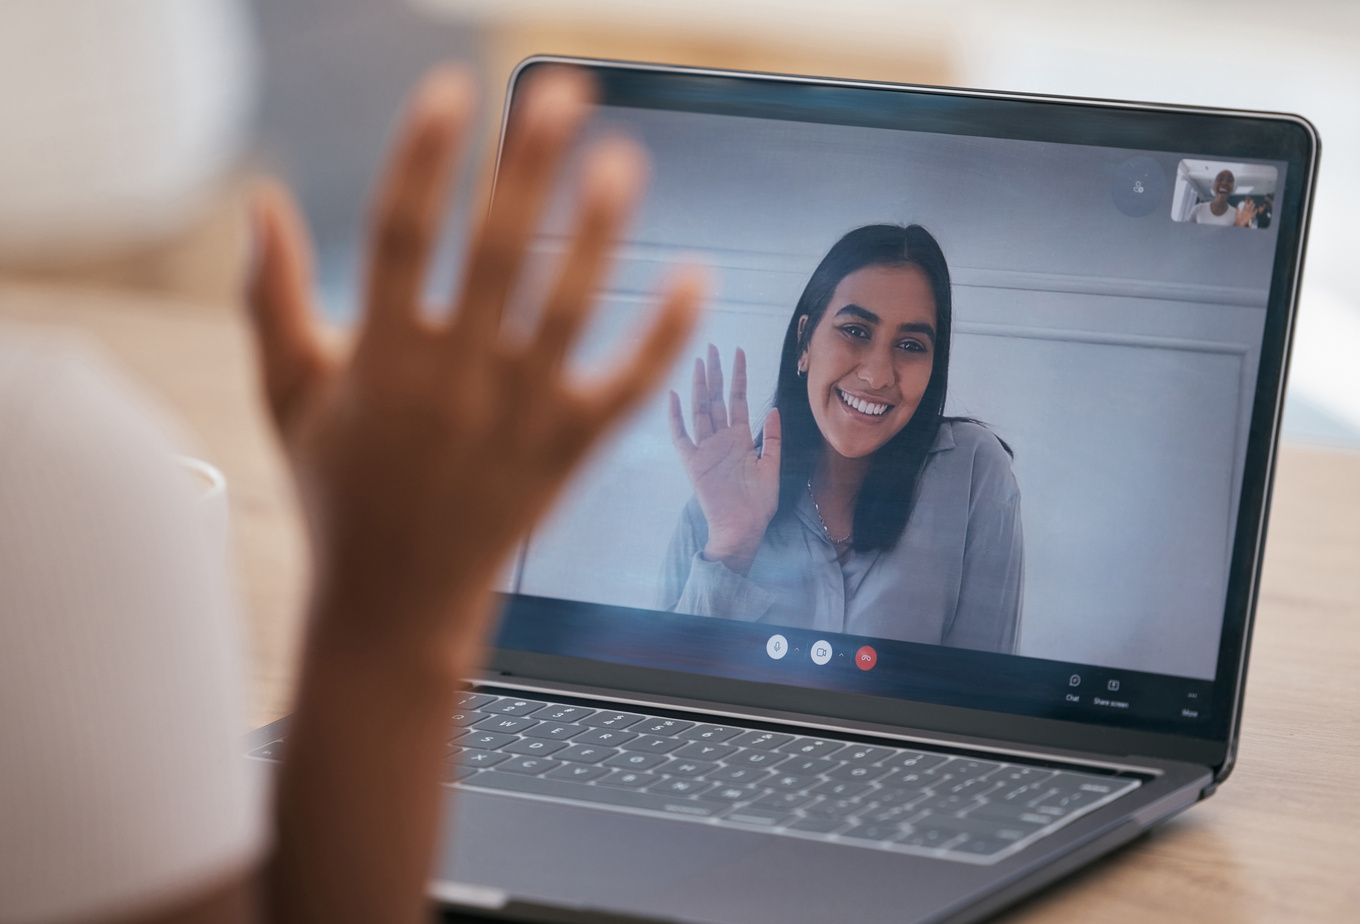 Laptop, Wave and Women on a Video Call for a Digital Business Meeting, Coaching and Online Mentorship Training. Smile, Communication and Happy Friends Networking, Talking and Speaking on the Internet